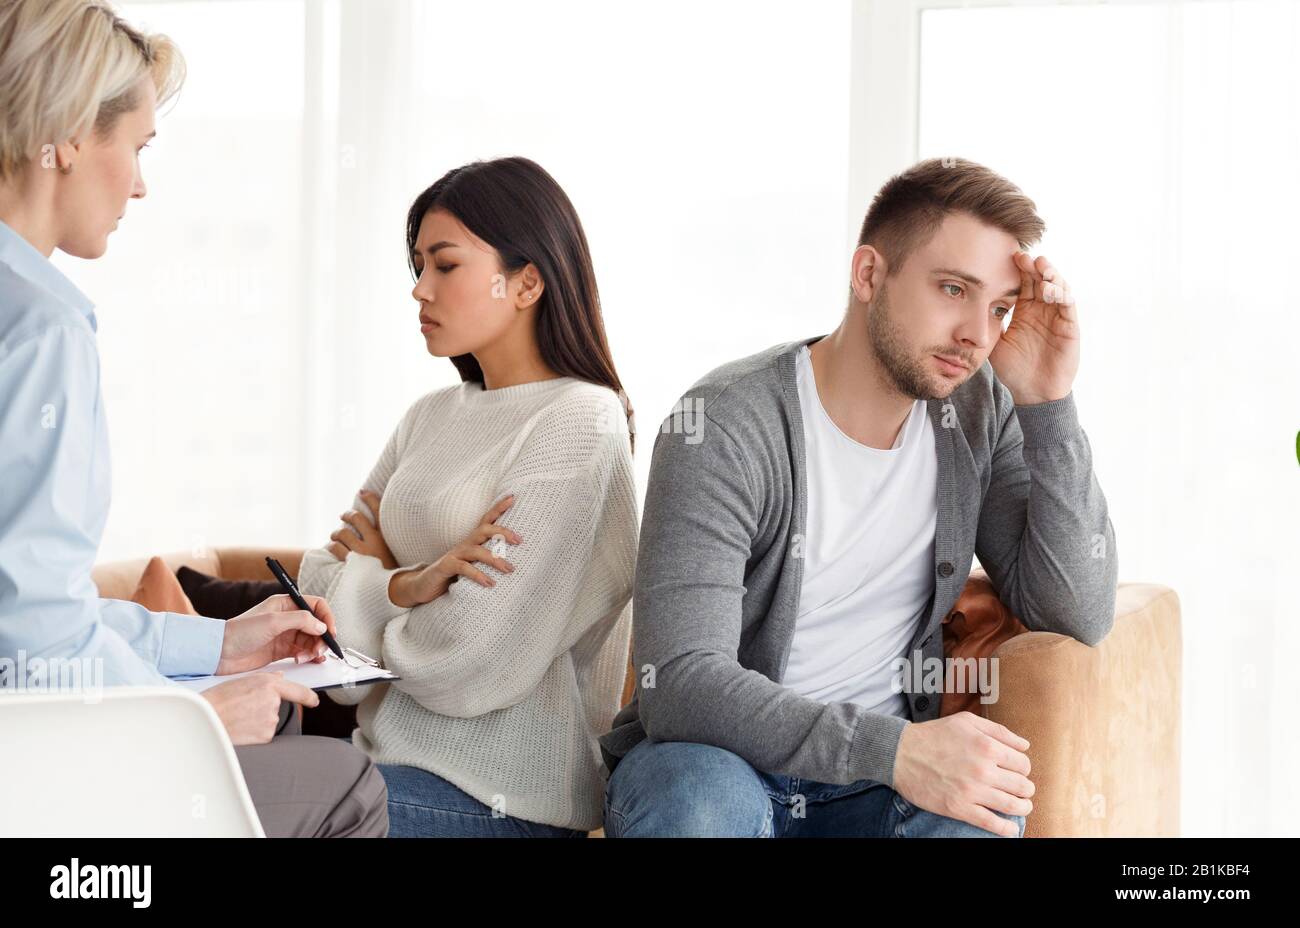 Indifferent Spouses Having Conflict Sitting Back-To-Back In Psychologist's Office Stock Photo